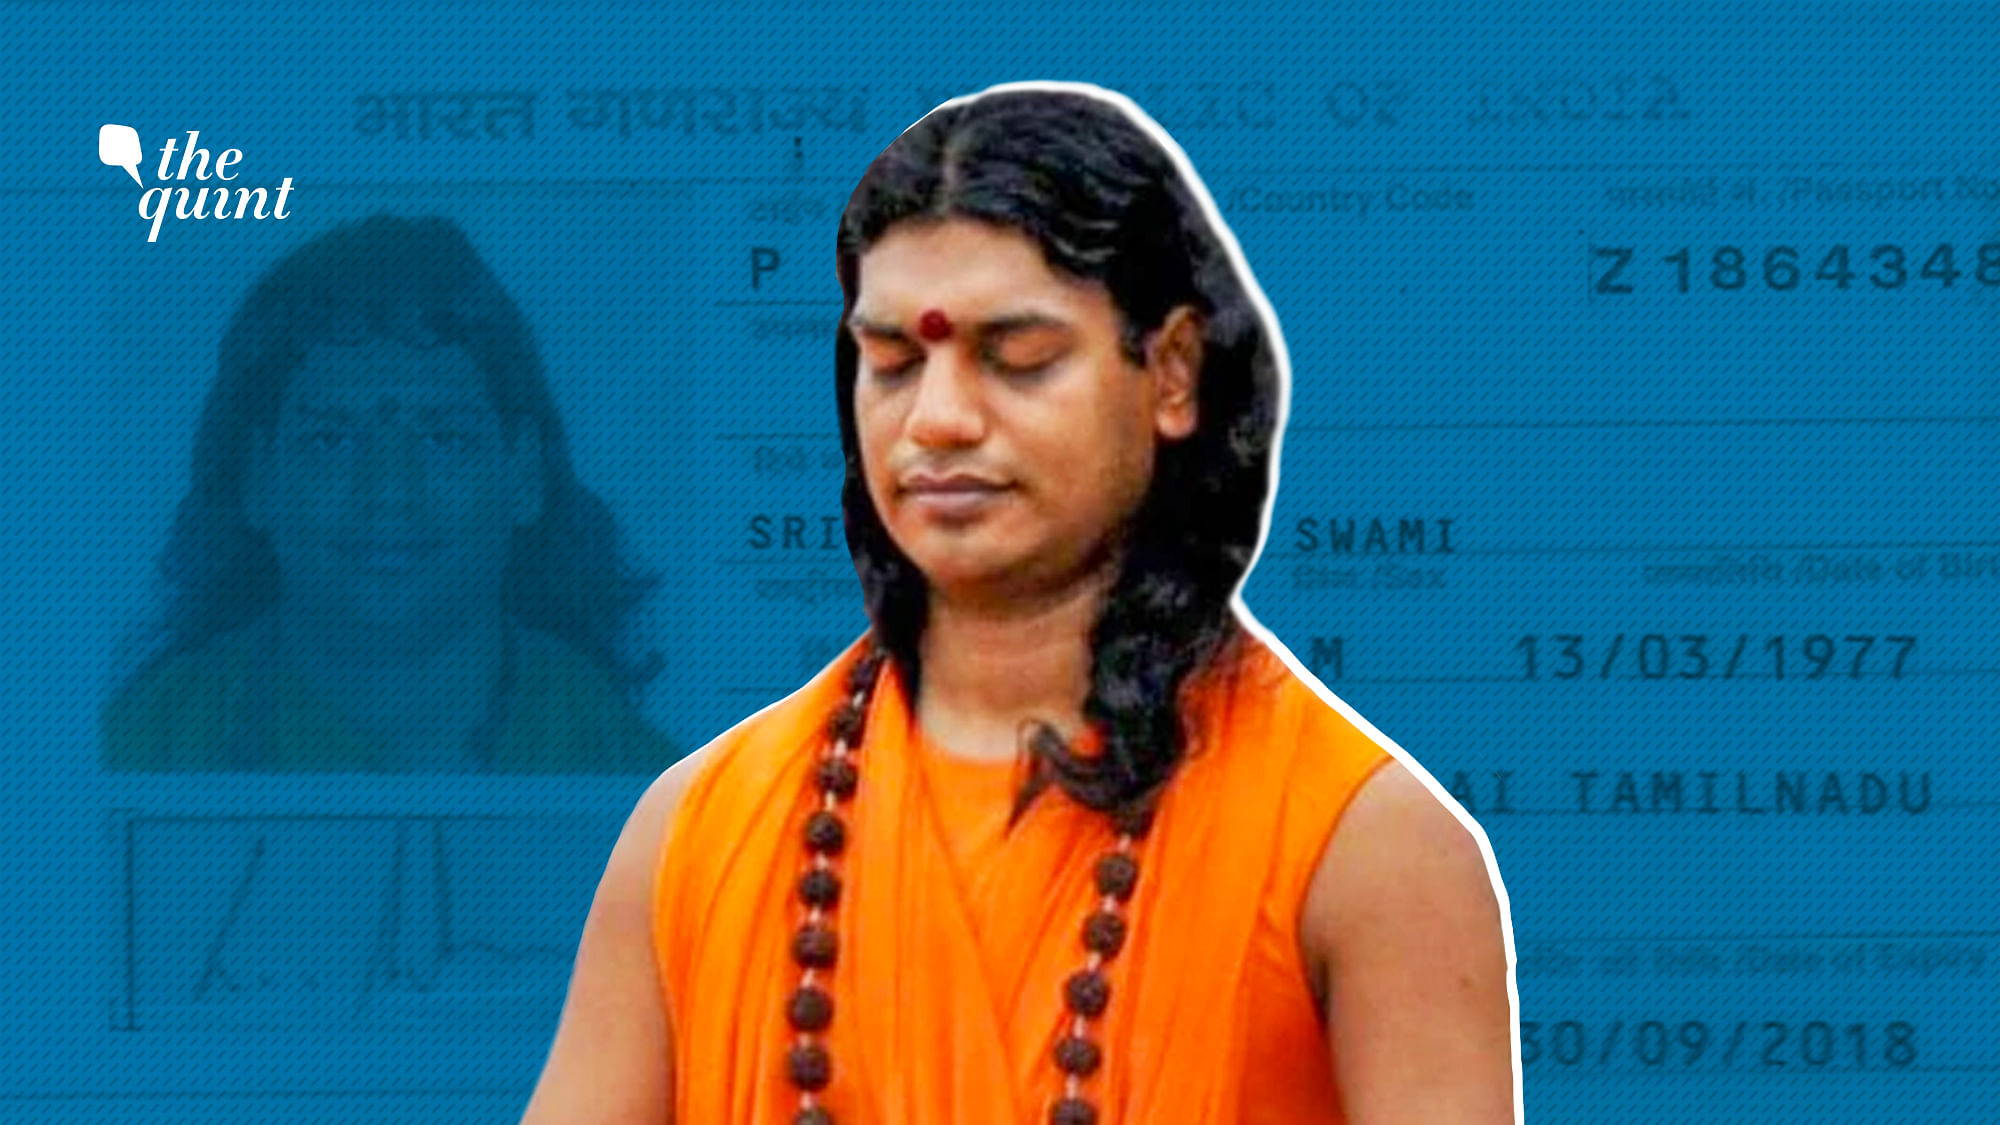 A case of rape was registered against Nithyananda in 2010 after a US citizen accused him of raping her for over five years in the guise of spirituality.